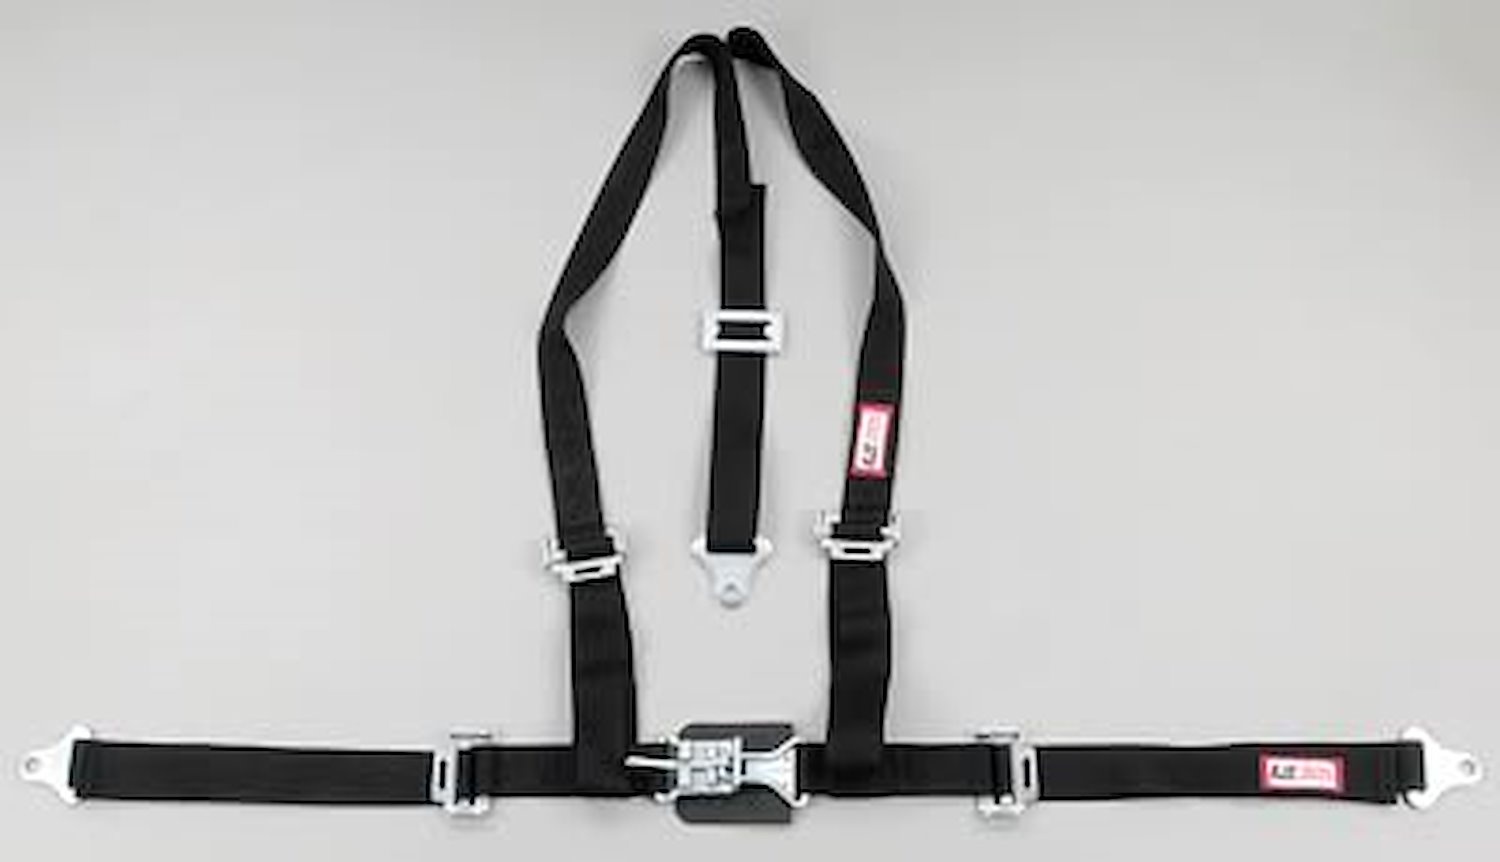 NON-SFI L&L HARNESS 3 PULL UP Lap Belt BOLT SEWN IN 2 S.H. Y FLOOR Mount w/STERNUM STRAP WRAP/BOLT HOT PINK